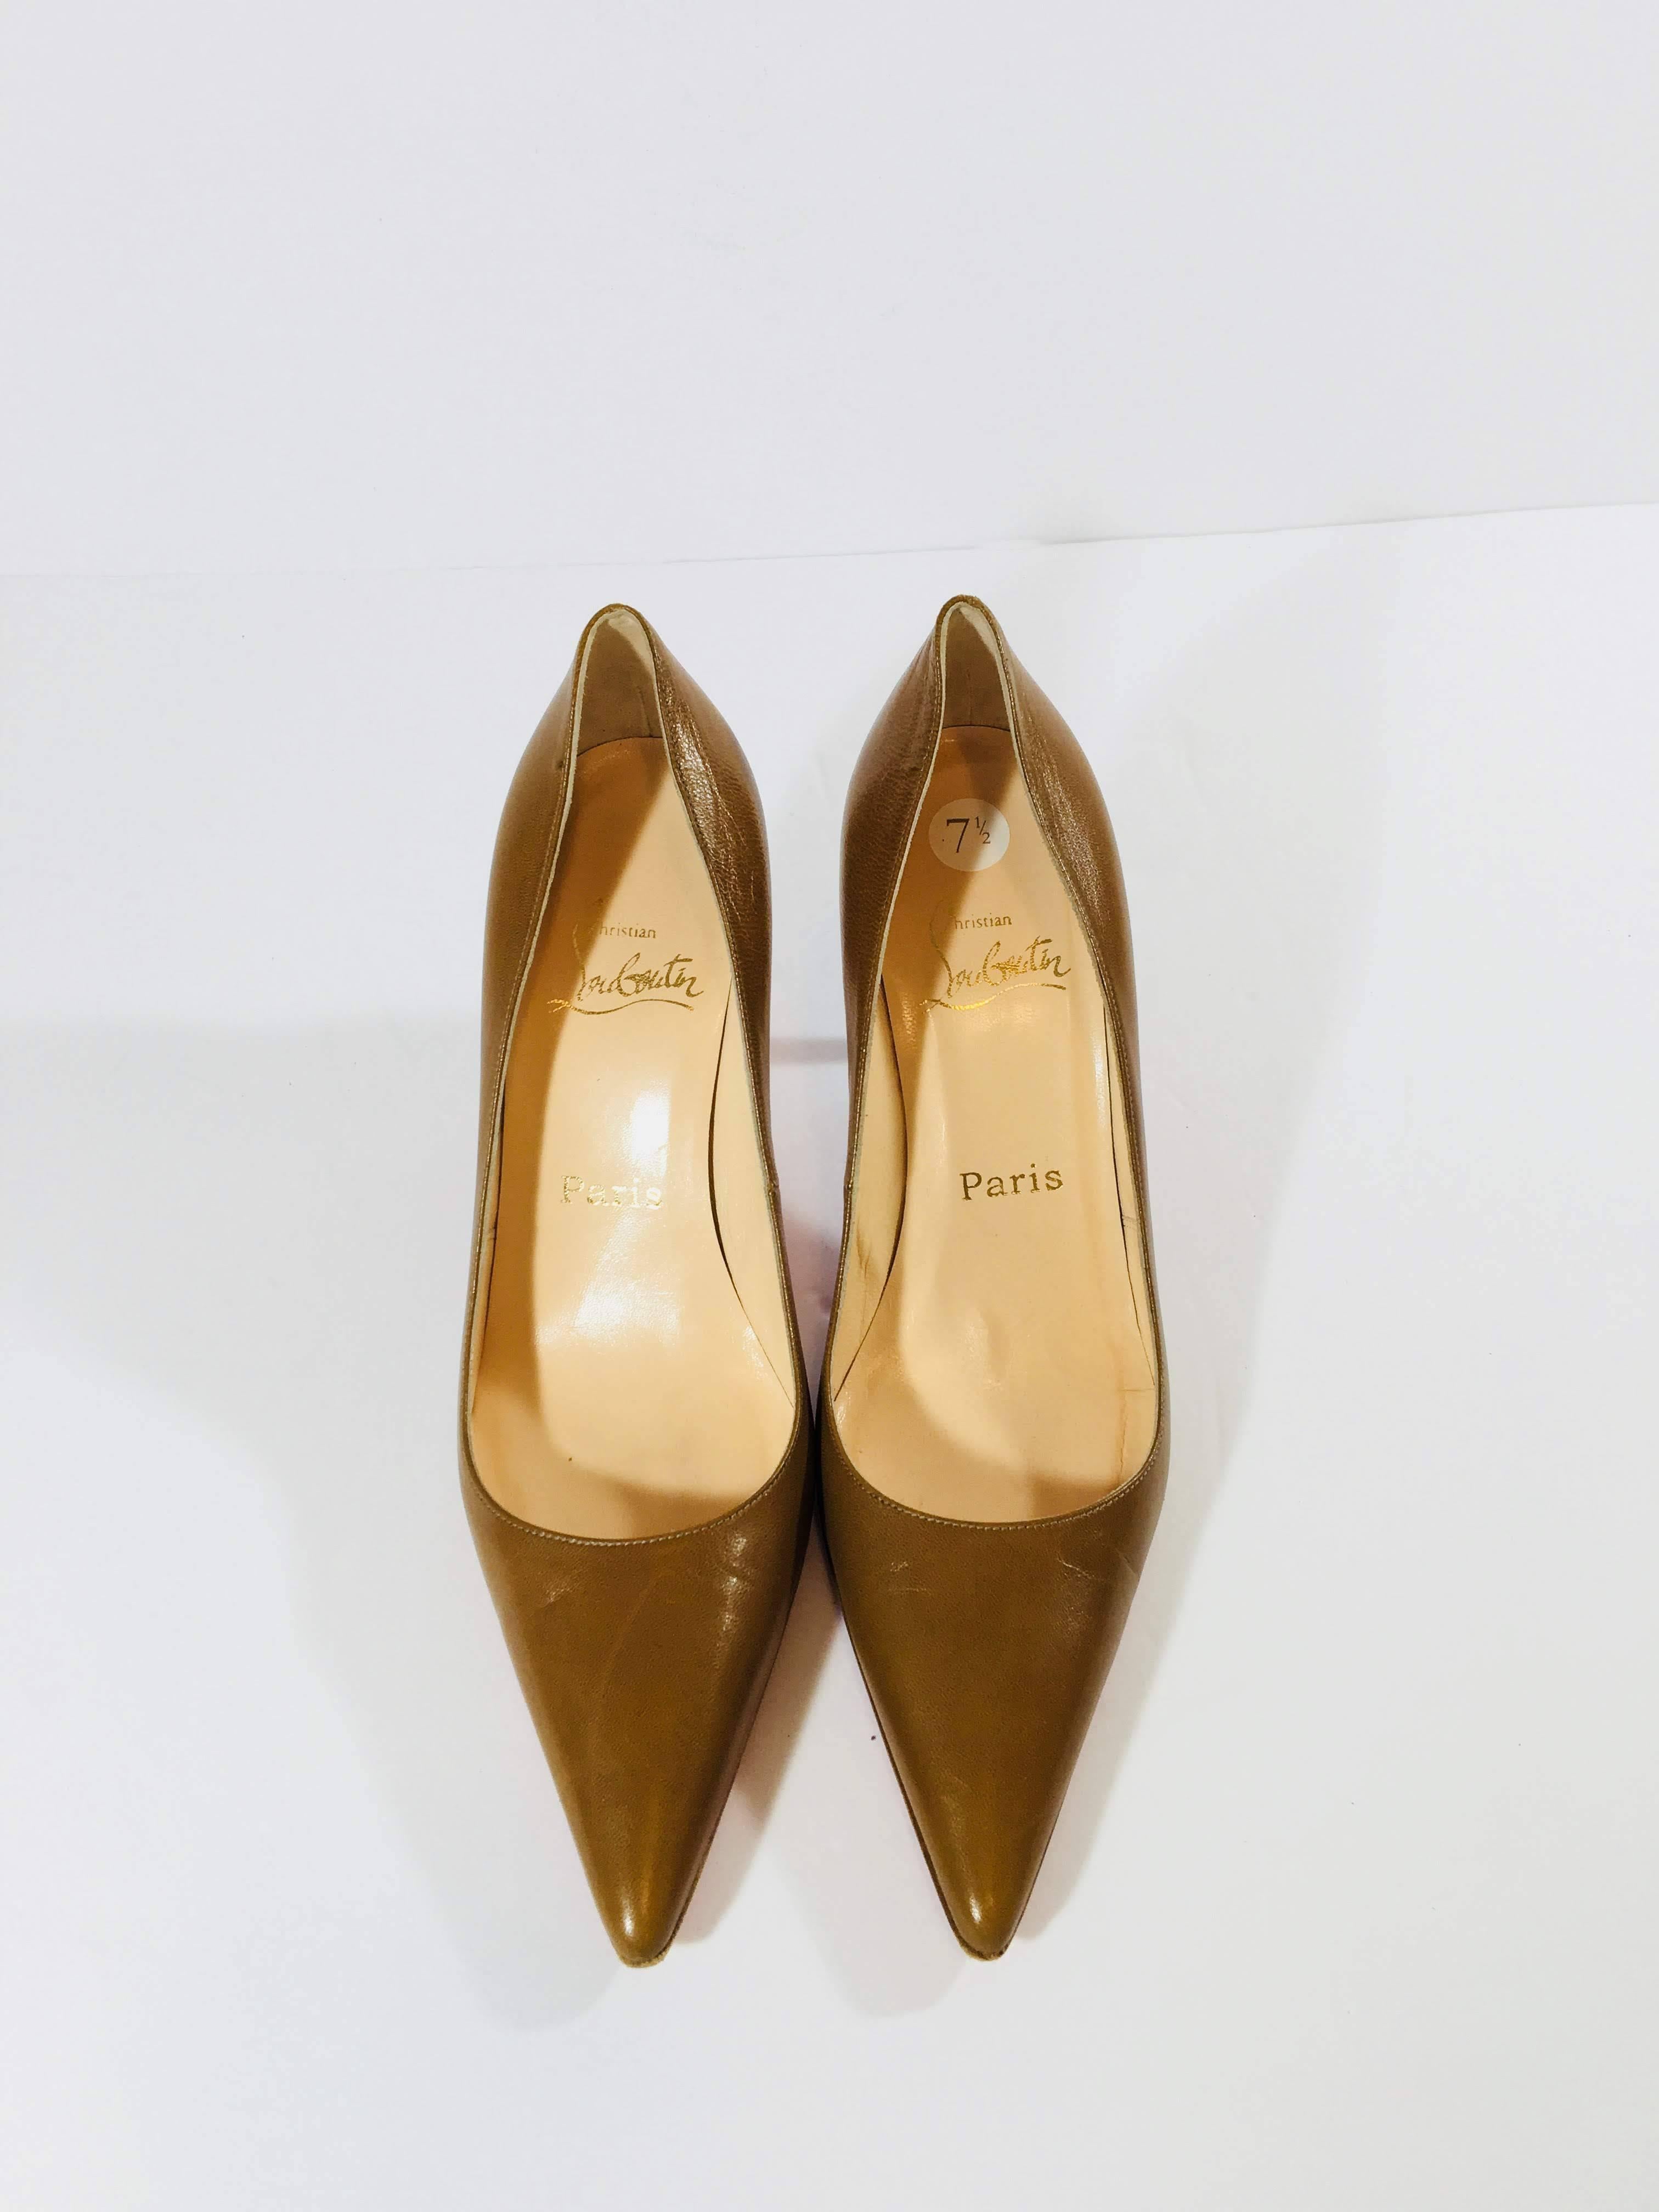 Christian Louboutin Brown Leather Heels, Pointed Toe Pumps.